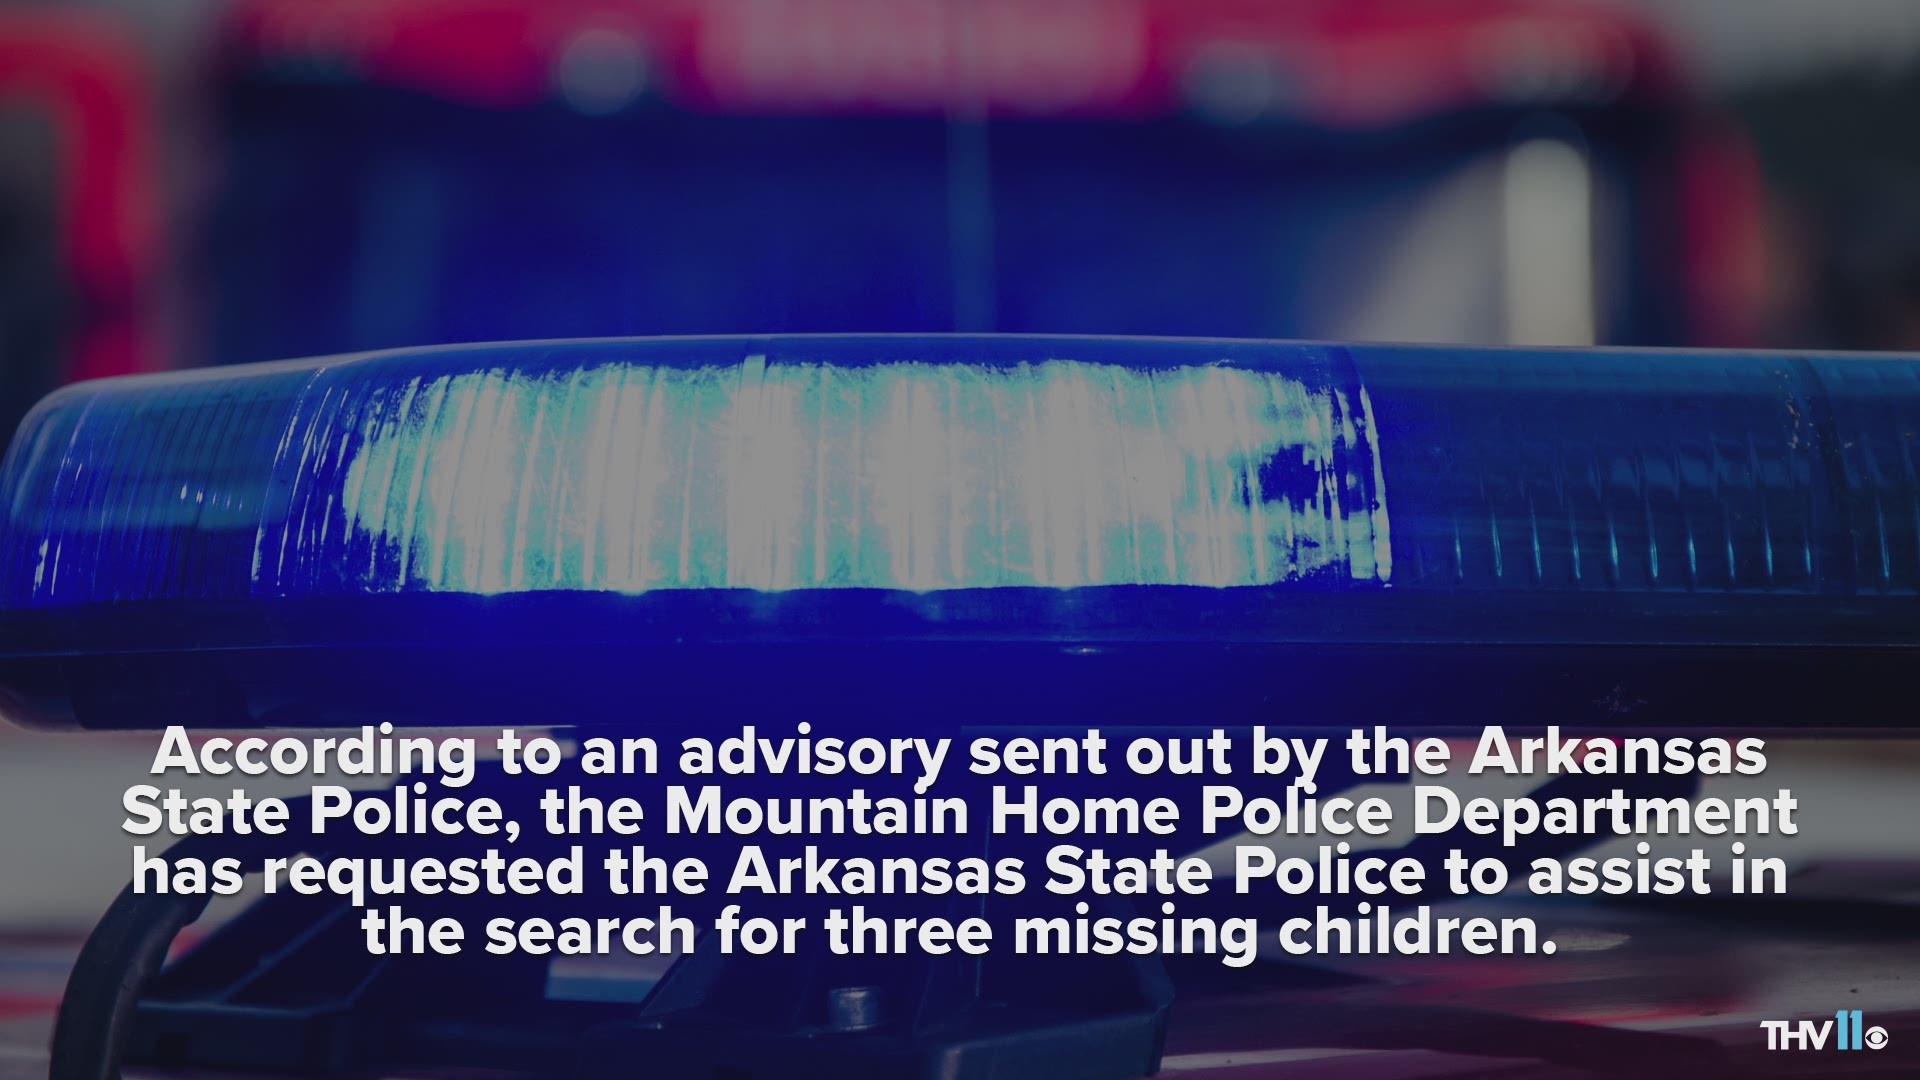 The Mountain Home Police Department has requested the Arkansas State Police to assist in the search for three missing children.